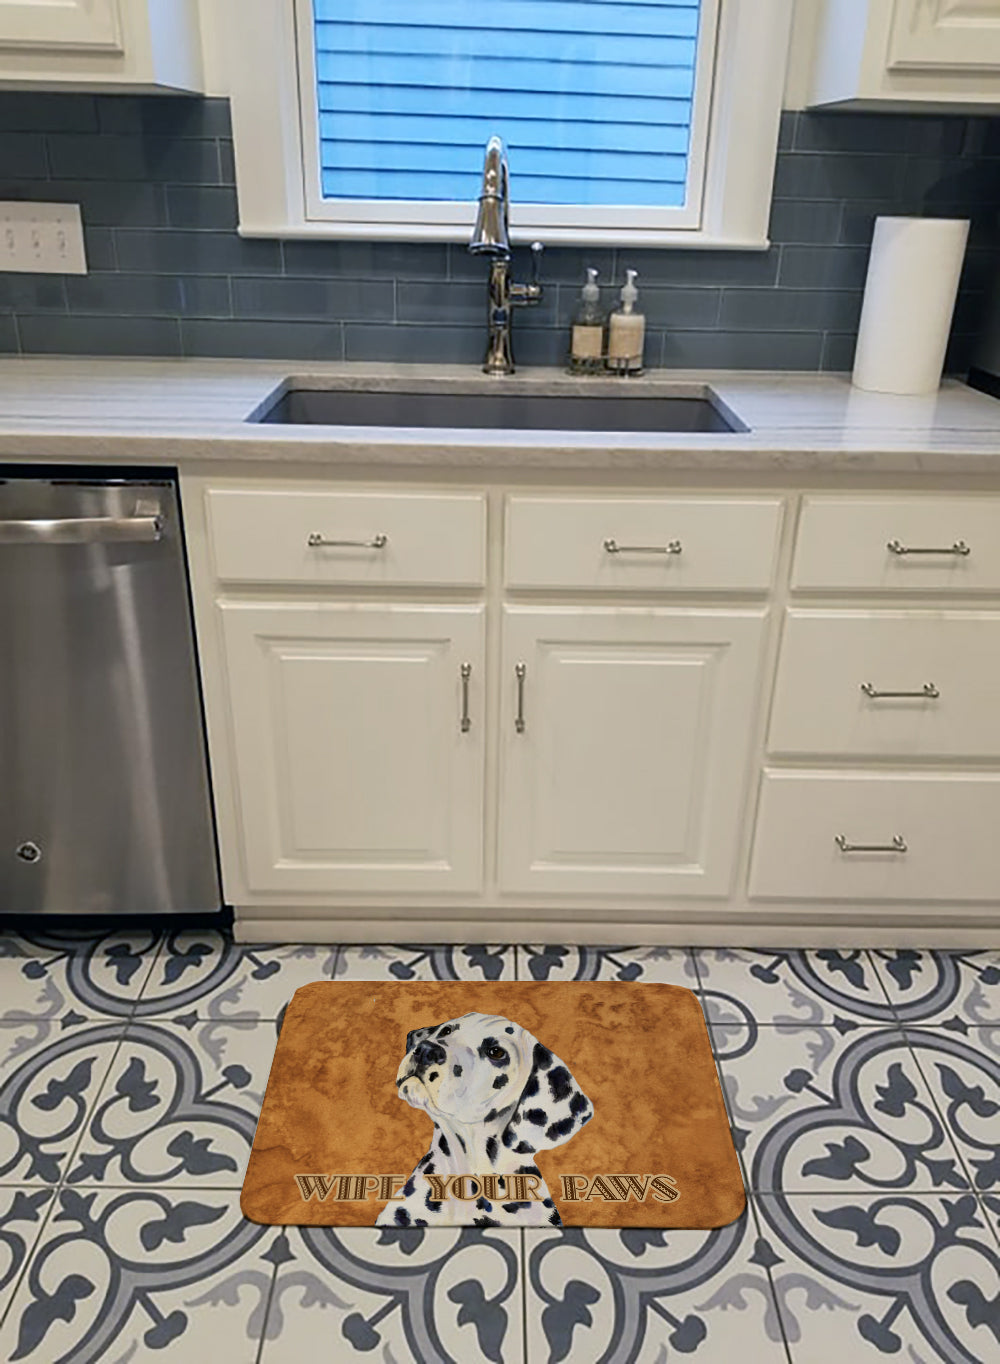 Dalmatian Wipe your Paws Machine Washable Memory Foam Mat SS4892RUG - the-store.com